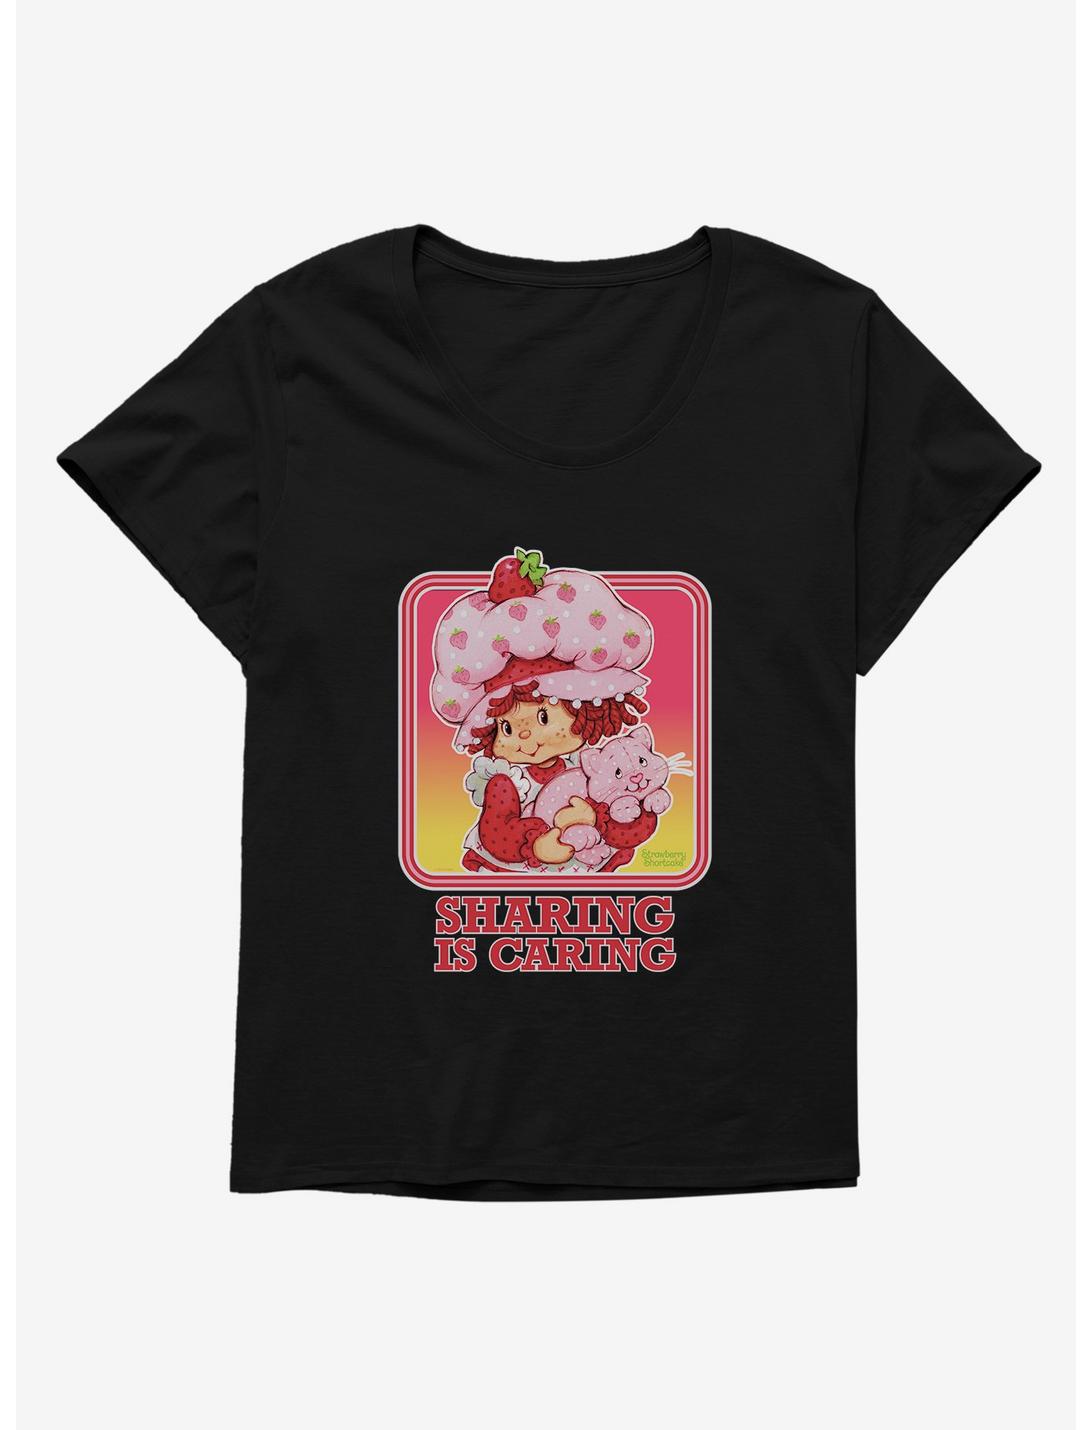 Strawberry Shortcake Vintage Sharing Is Caring Womens T-Shirt Plus Size, , hi-res